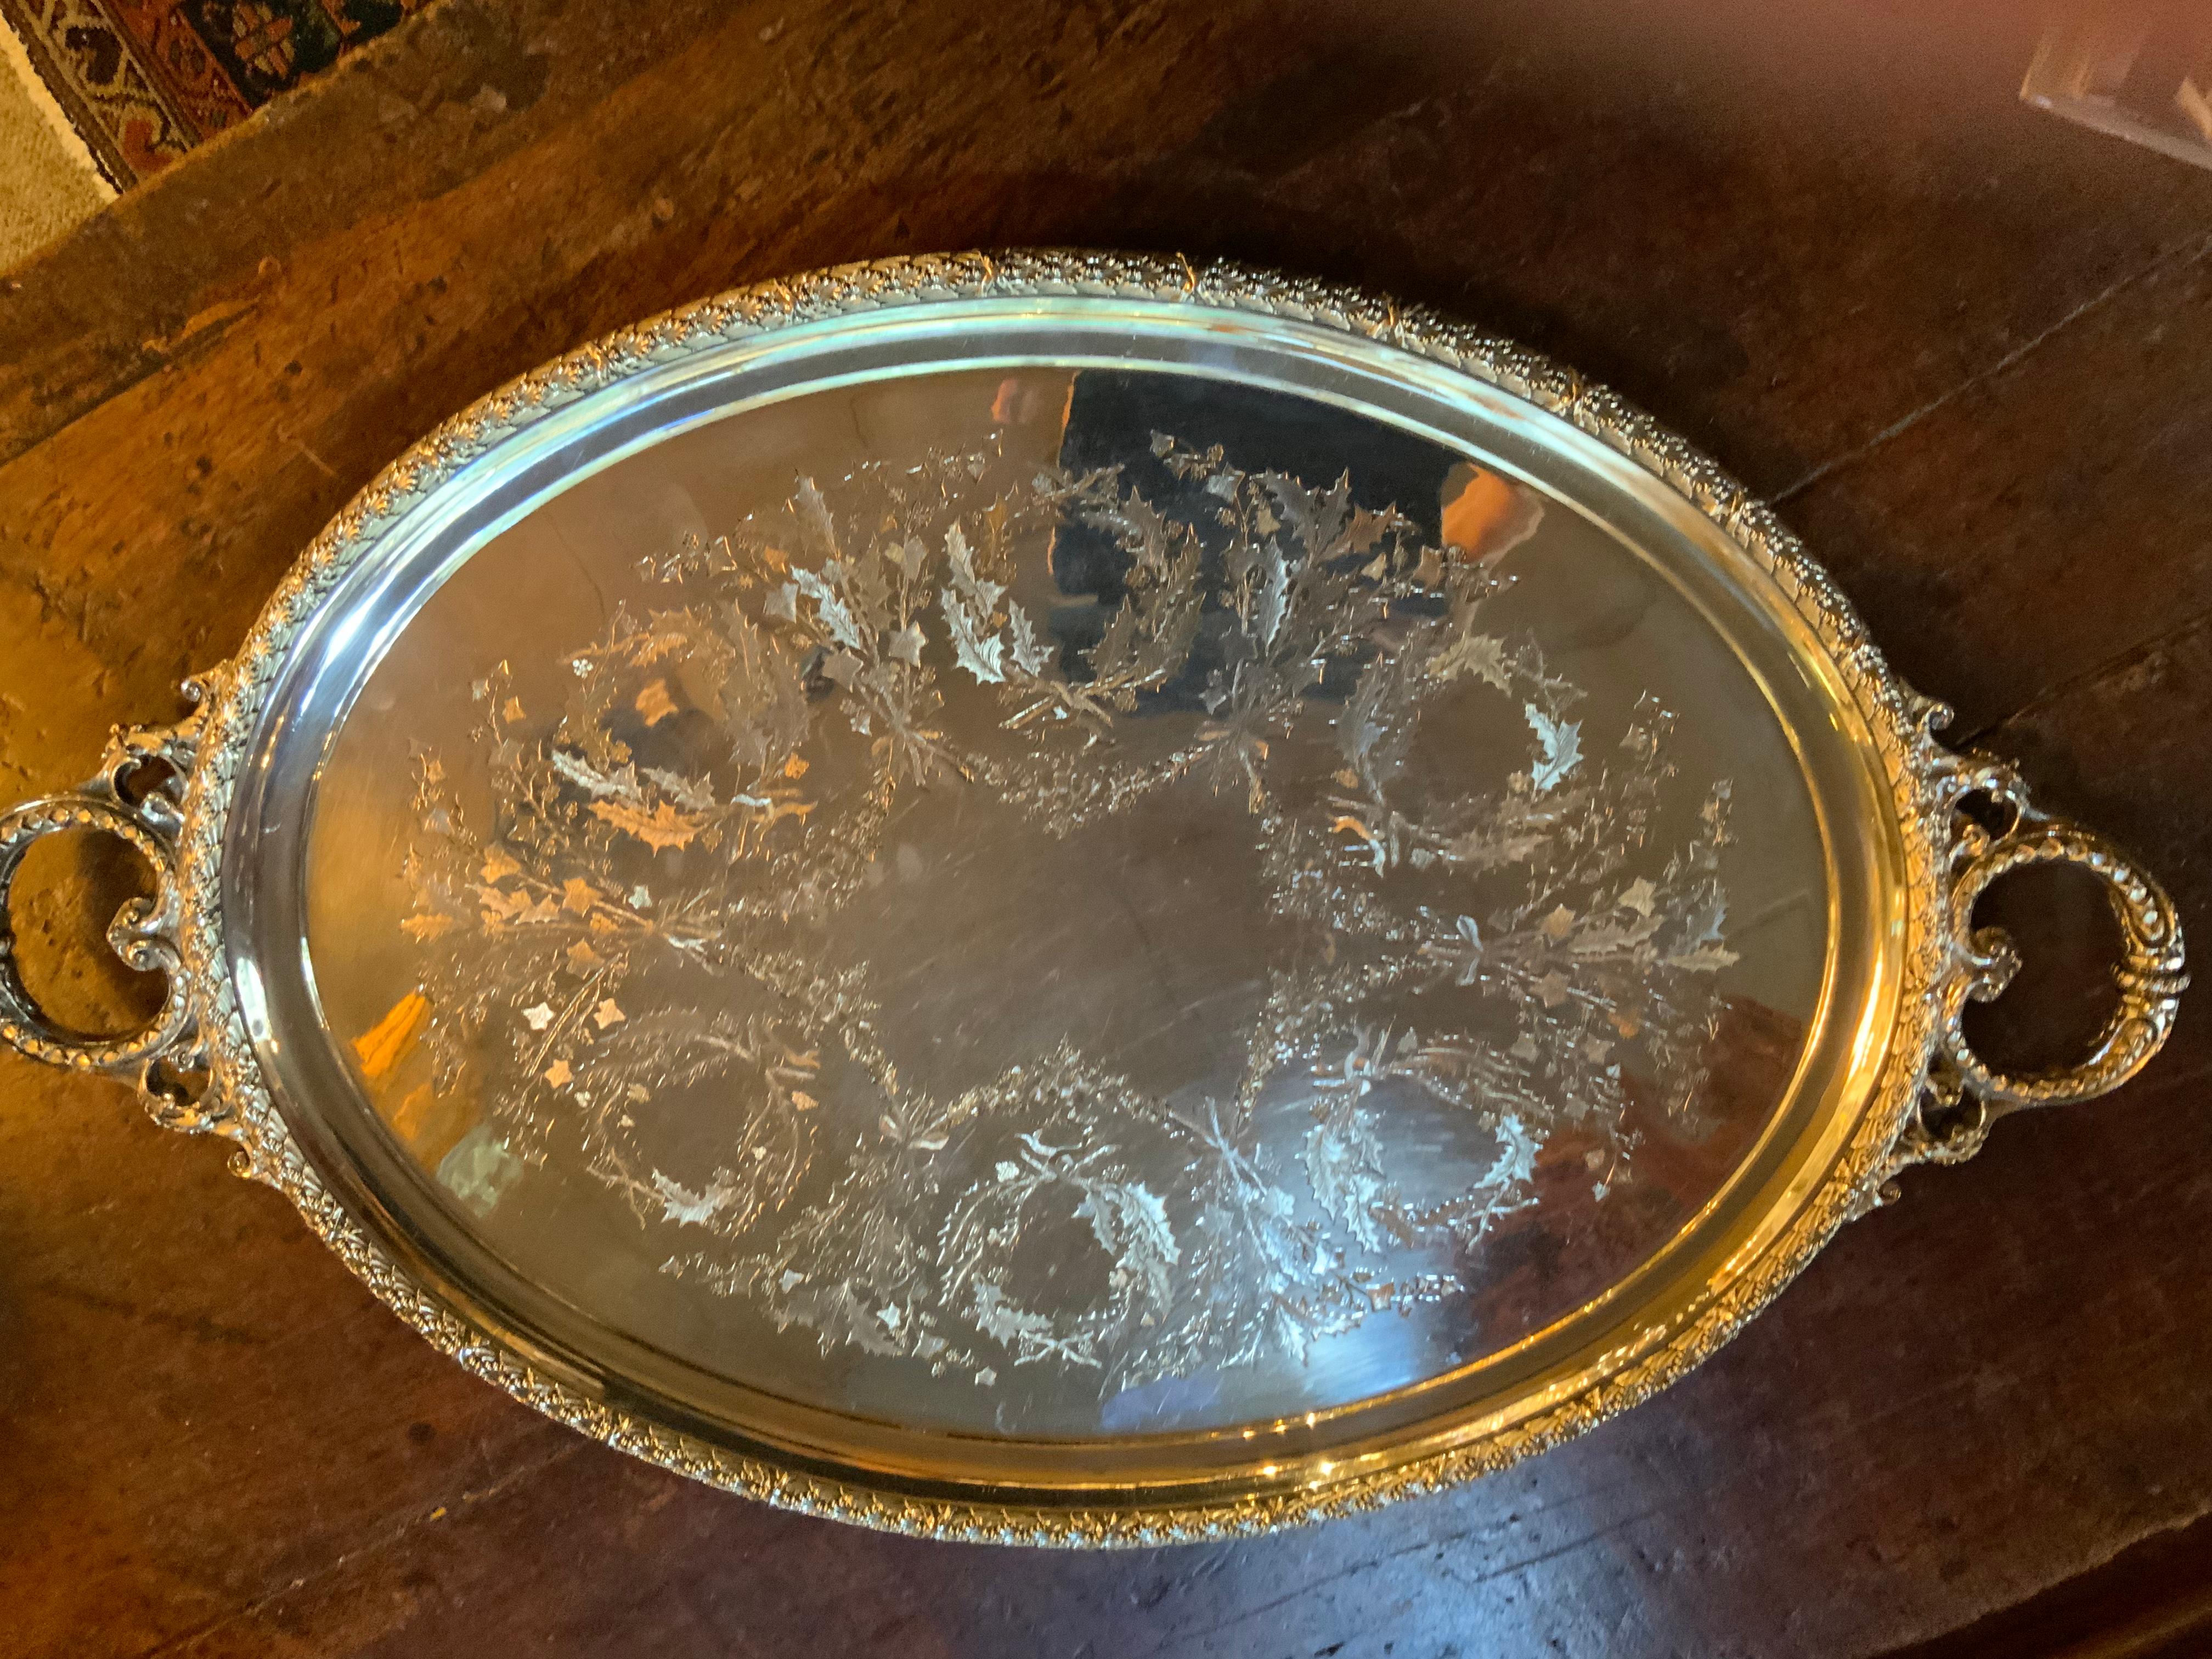 Exceptional sterling tray, perfect for the season. Circular design of holly and berries
Decorate this rare and beautiful piece.